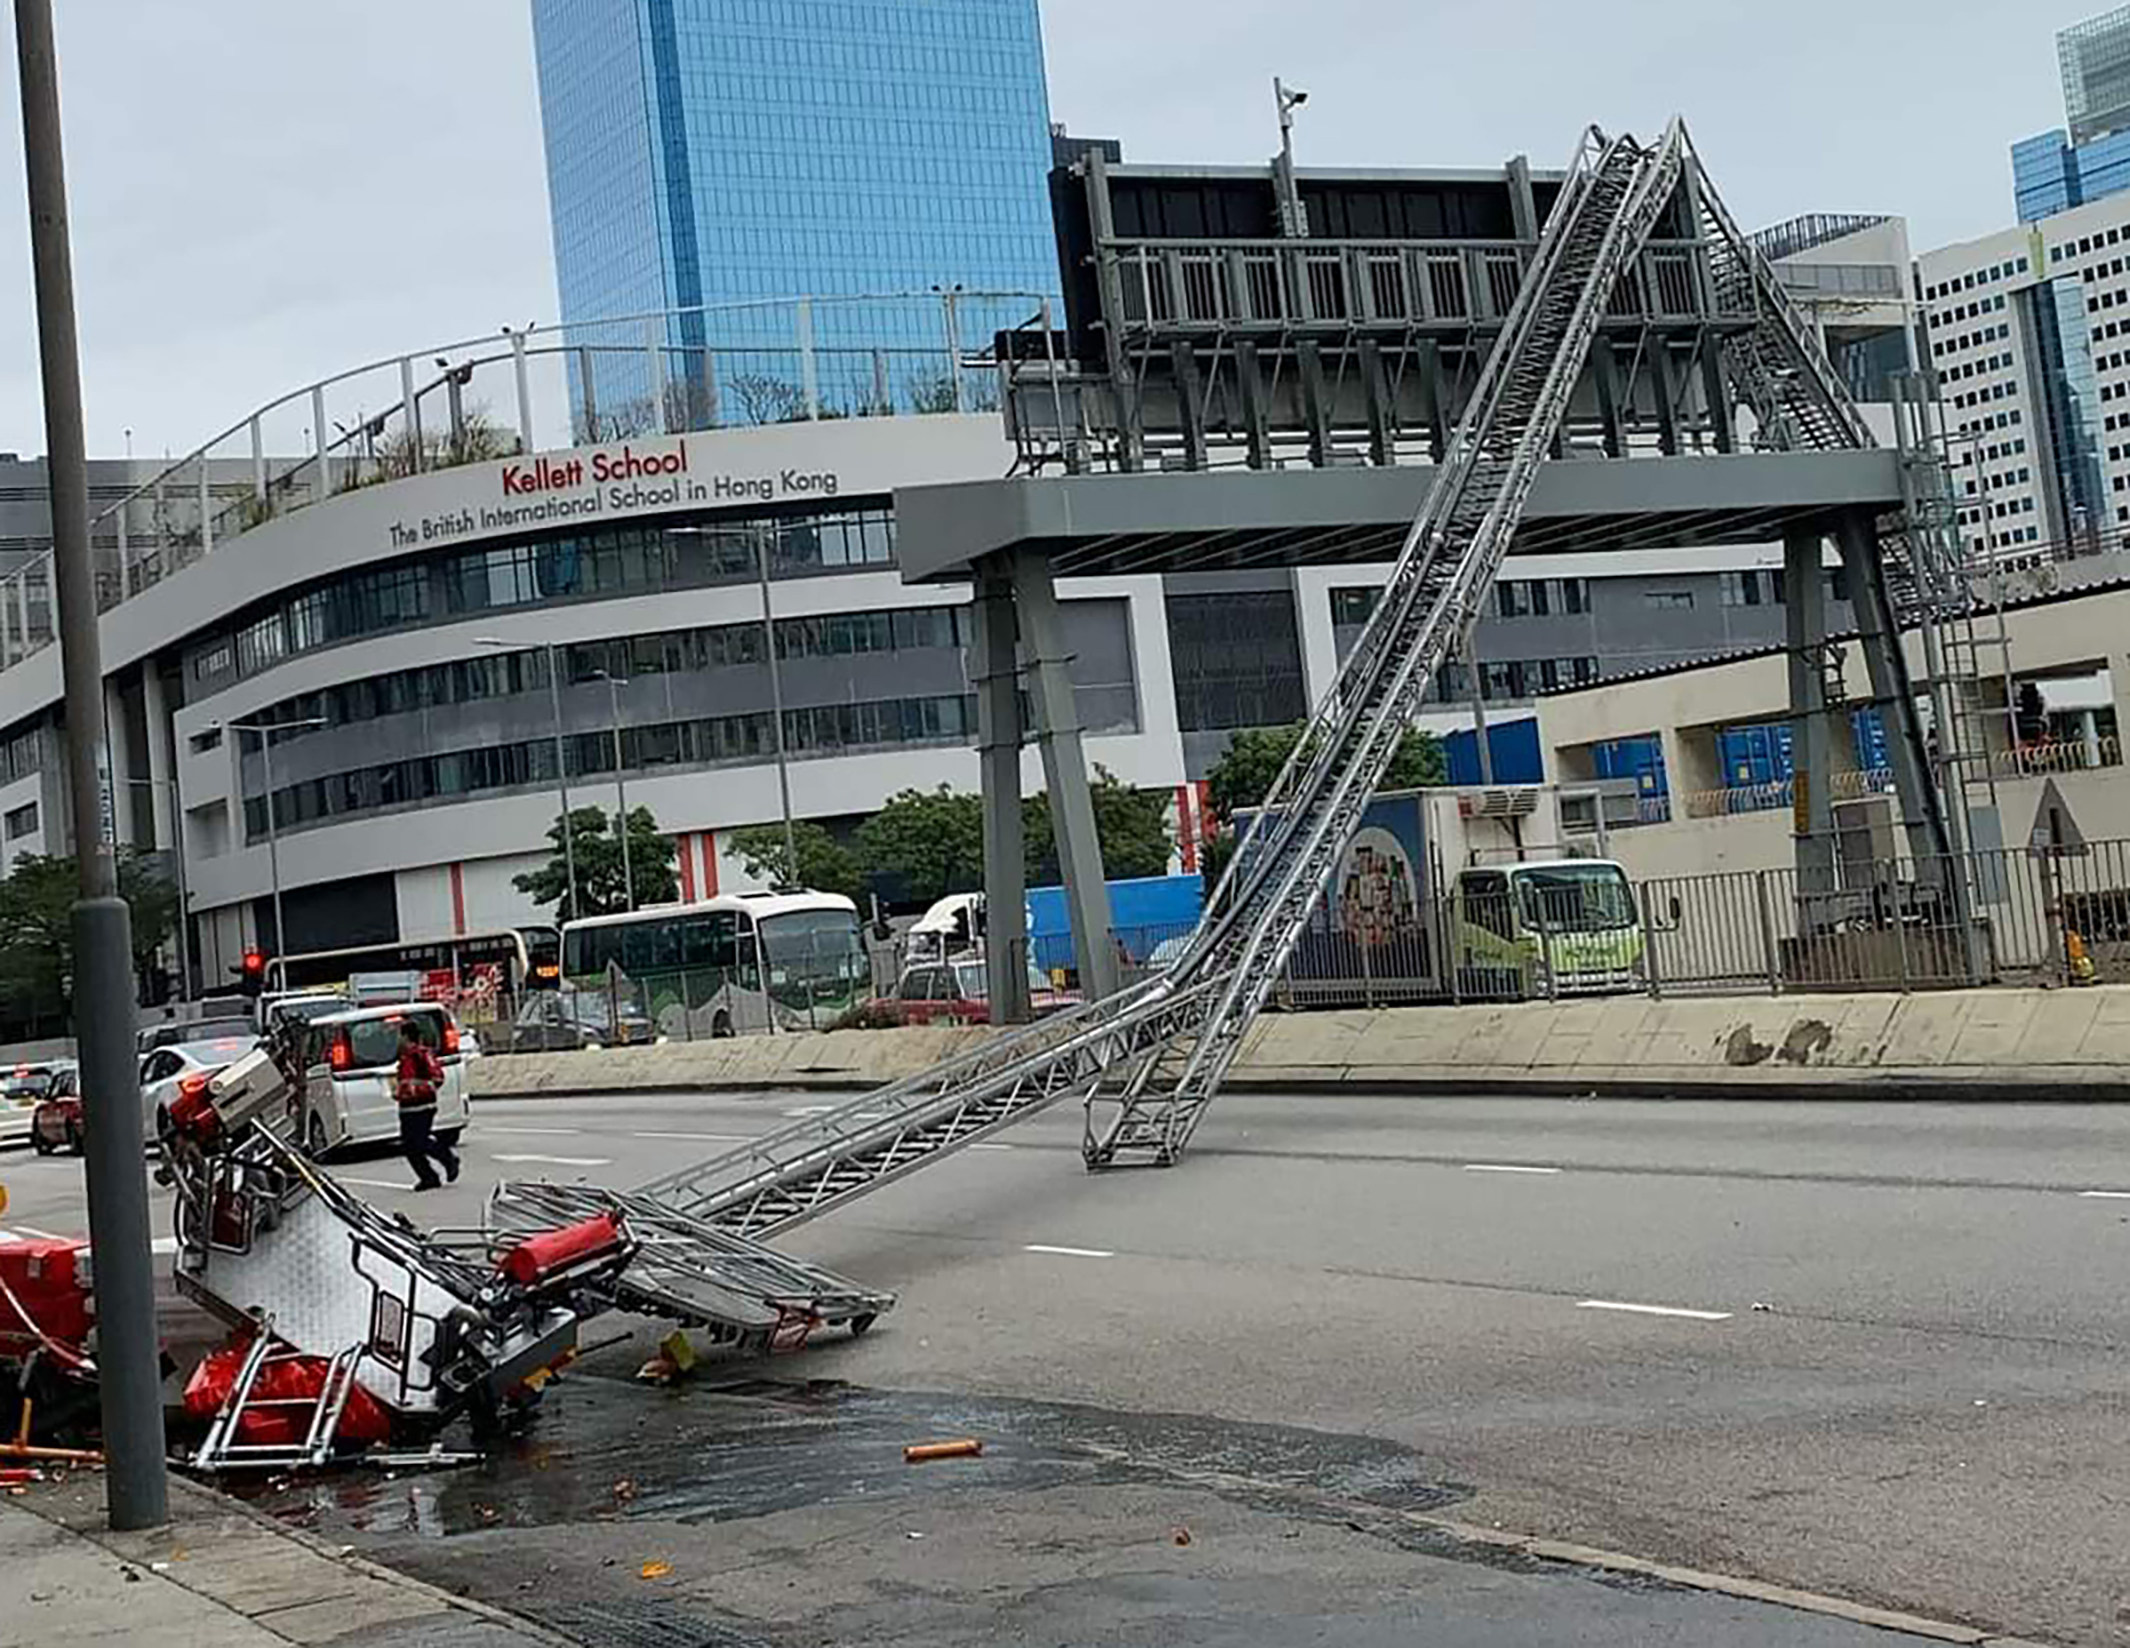 A 56-metre (184-foot) fire truck ladder collapsed on Friday blocking three lanes of Kai Cheung Road in Kowloon Bay on Friday. Photo: Handout